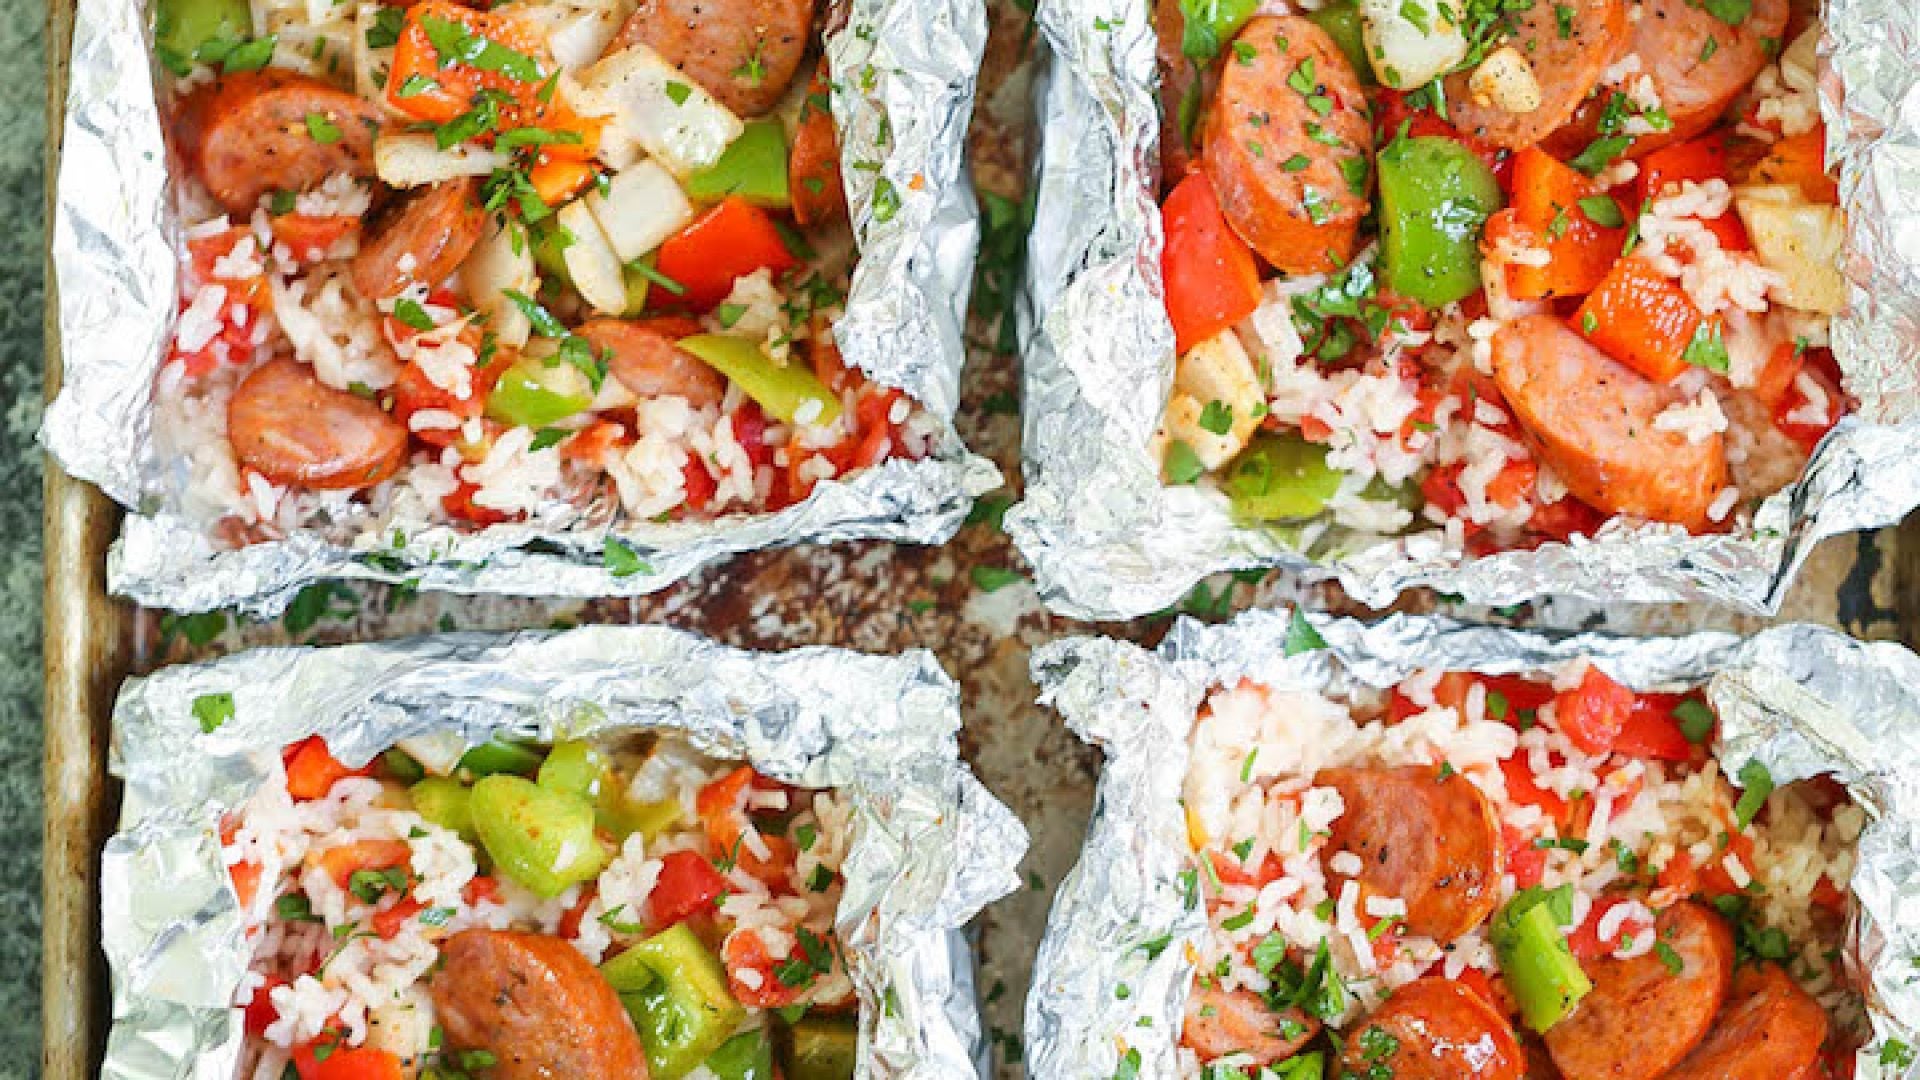 5 Easy Foil-Pack Dinners To Make When You Don’t Really Feel Like Cooking